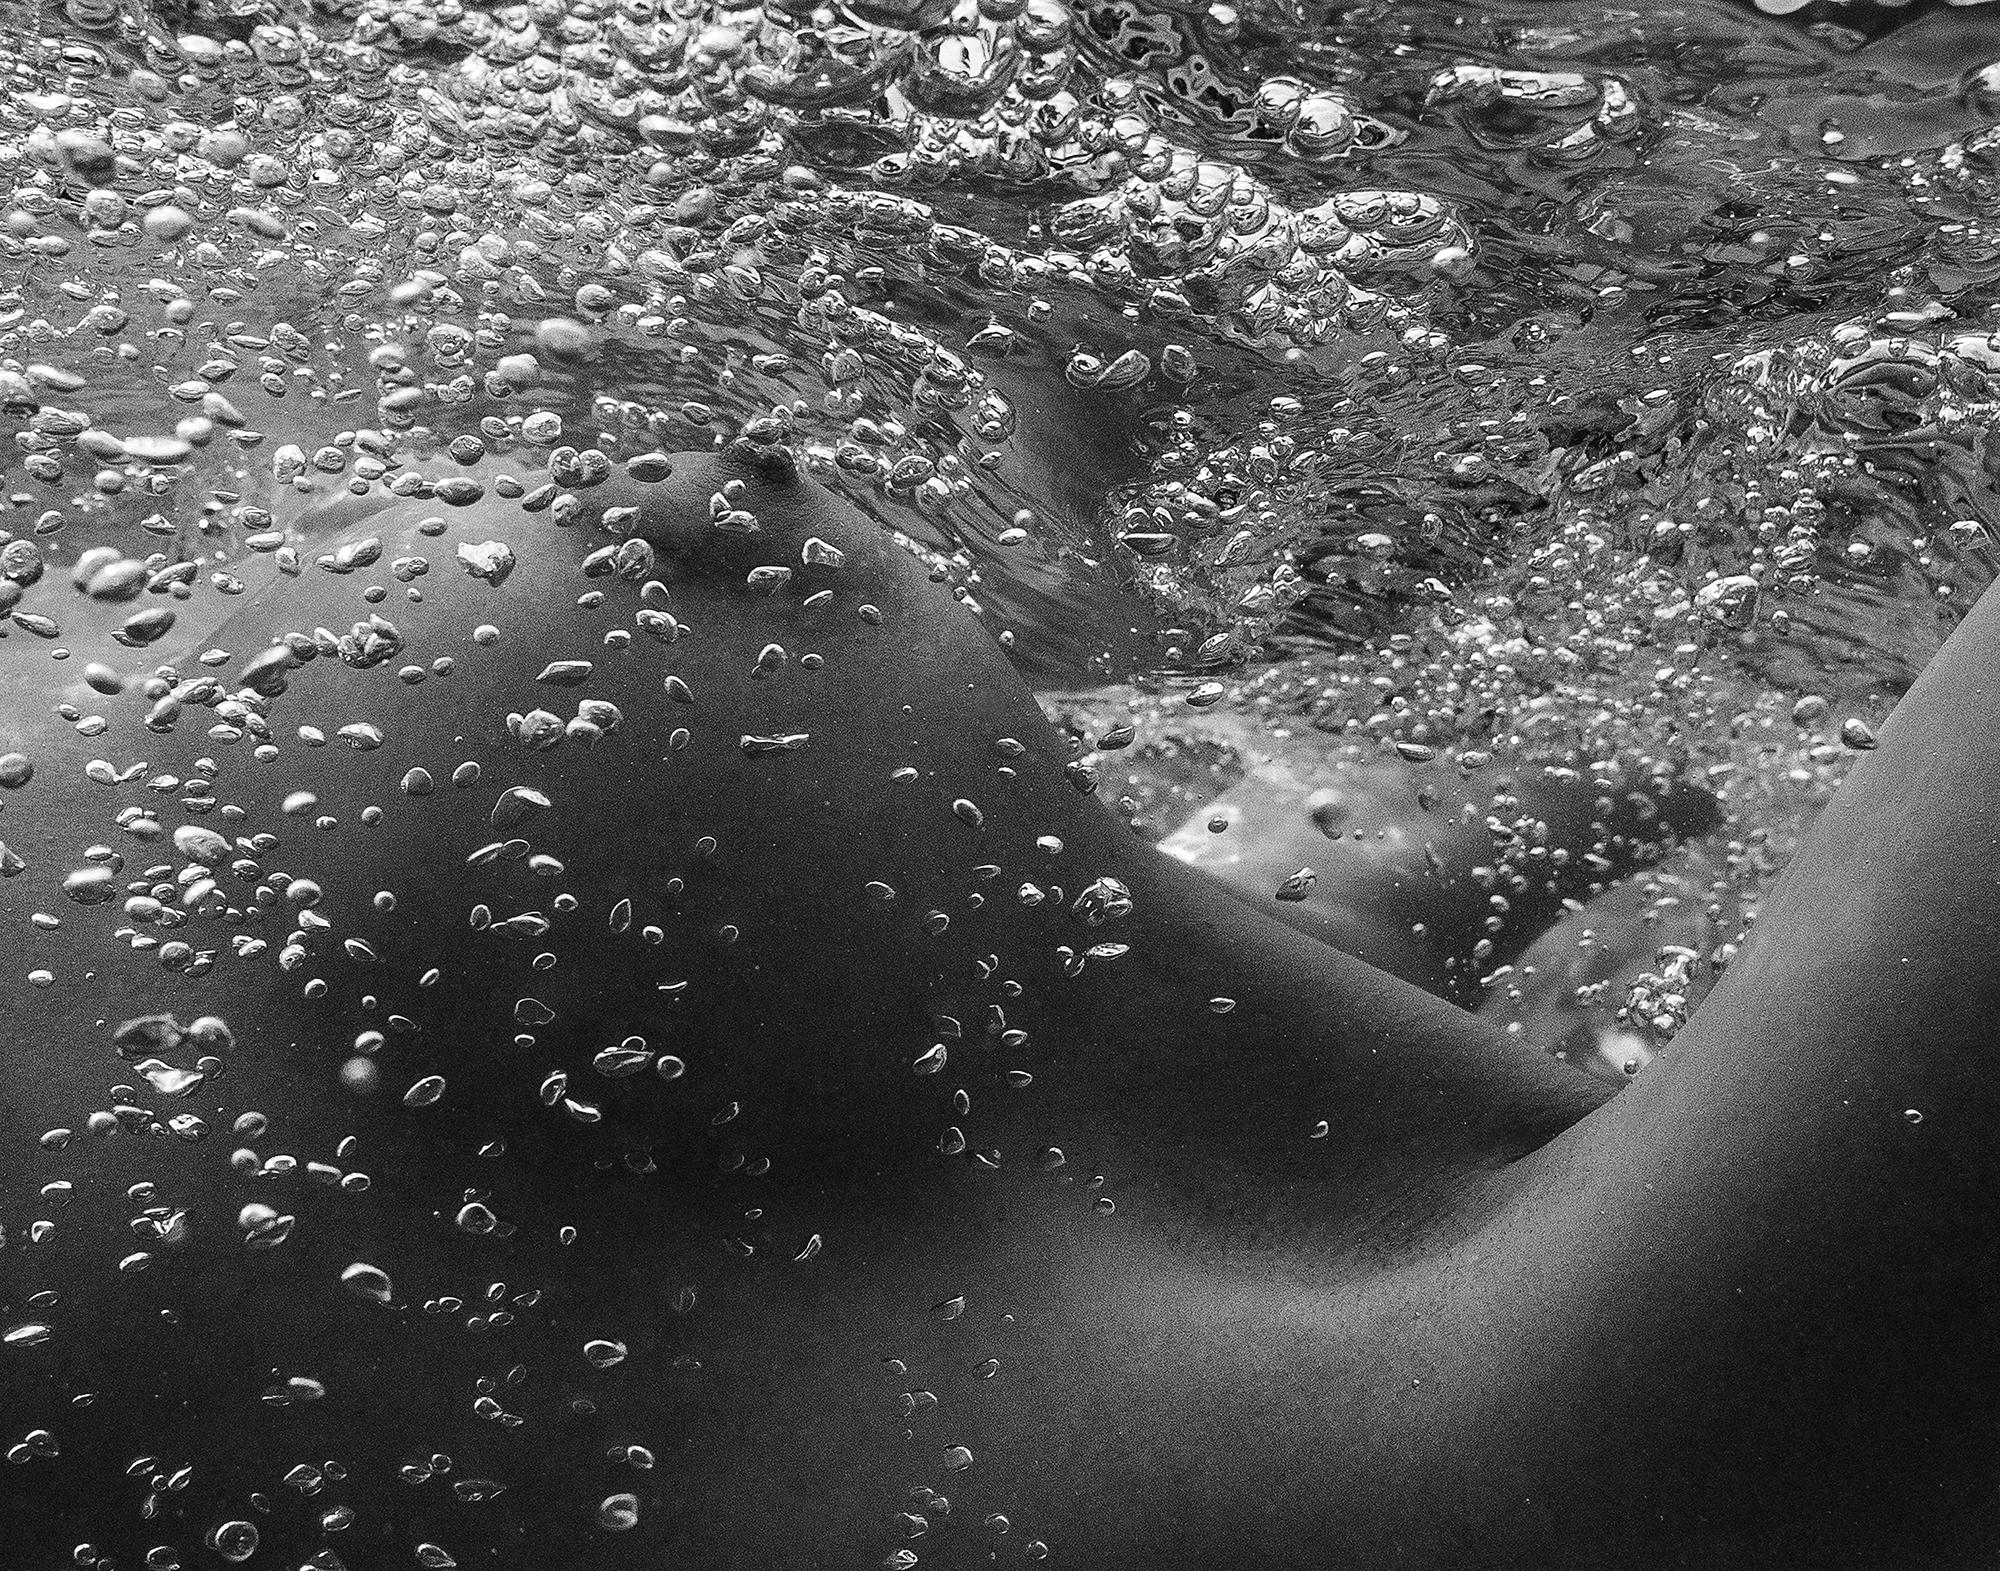 An underwater black and white photograph of beautiful naked young woman breasts covered with air bubbles.

“In my line of photography all best shots are snapped. This photograph is no exception. 
I do owe a debt of gratitude to the pool's owner for